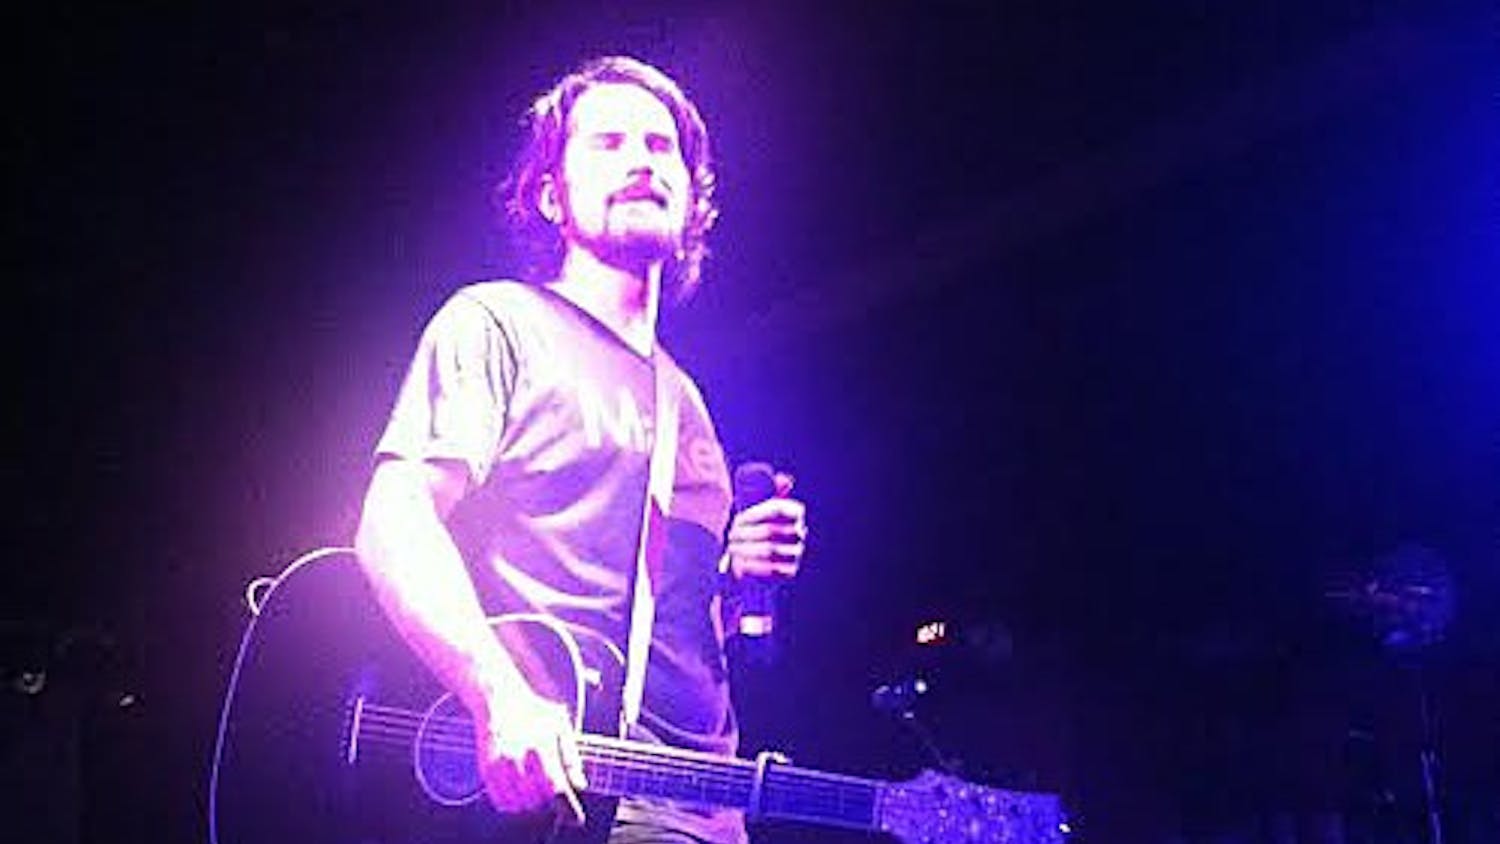 Singer-songwriter Matt Nathanson will perform for a sold-outcrowd at Cat’s Cradle tonight. He is promoting his newest album. (Courtesy of Ayat Soufan)